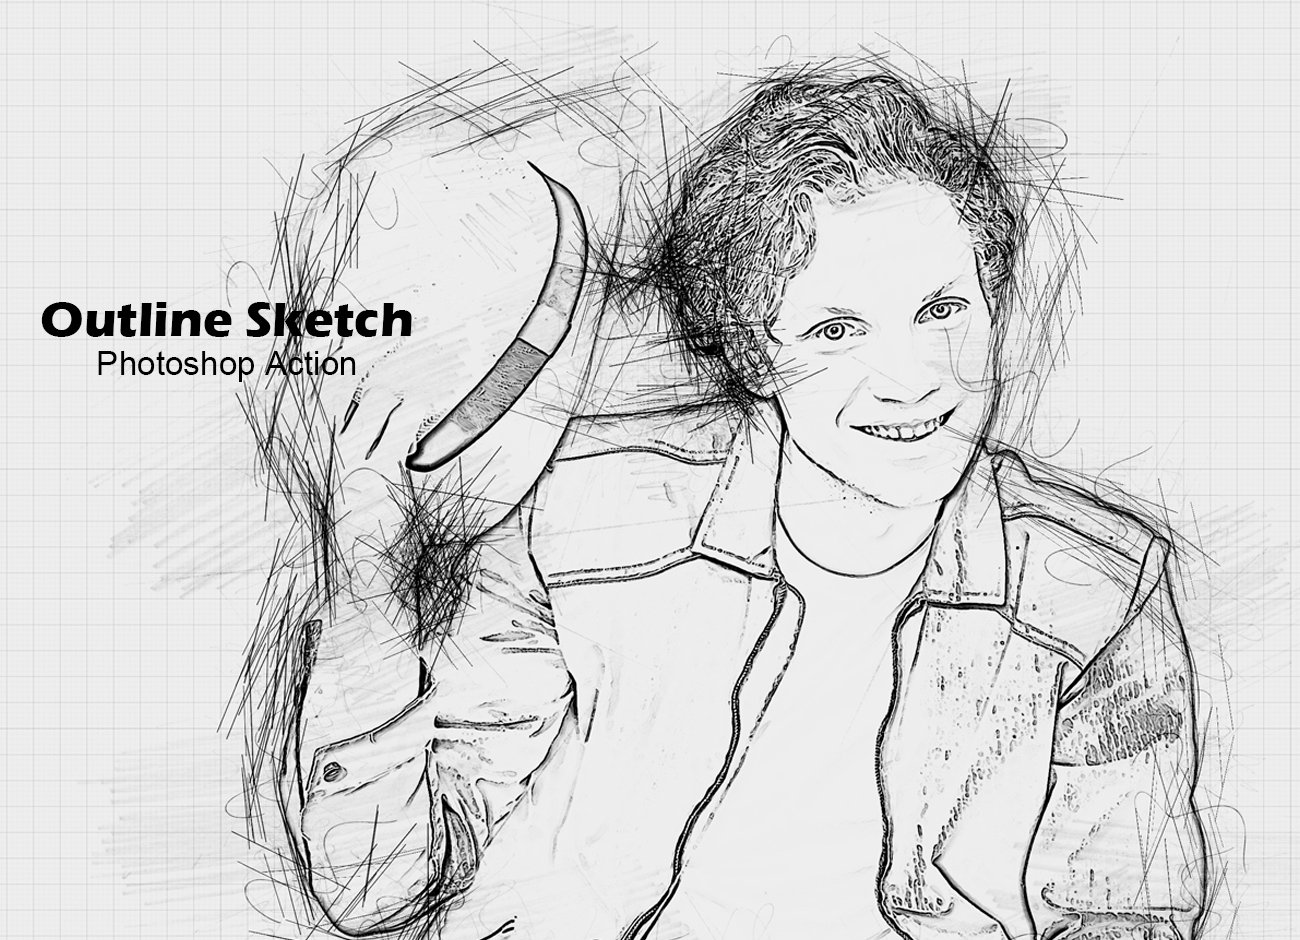 How to Make Sketch Effect in Photoshop CS6 - YouTube